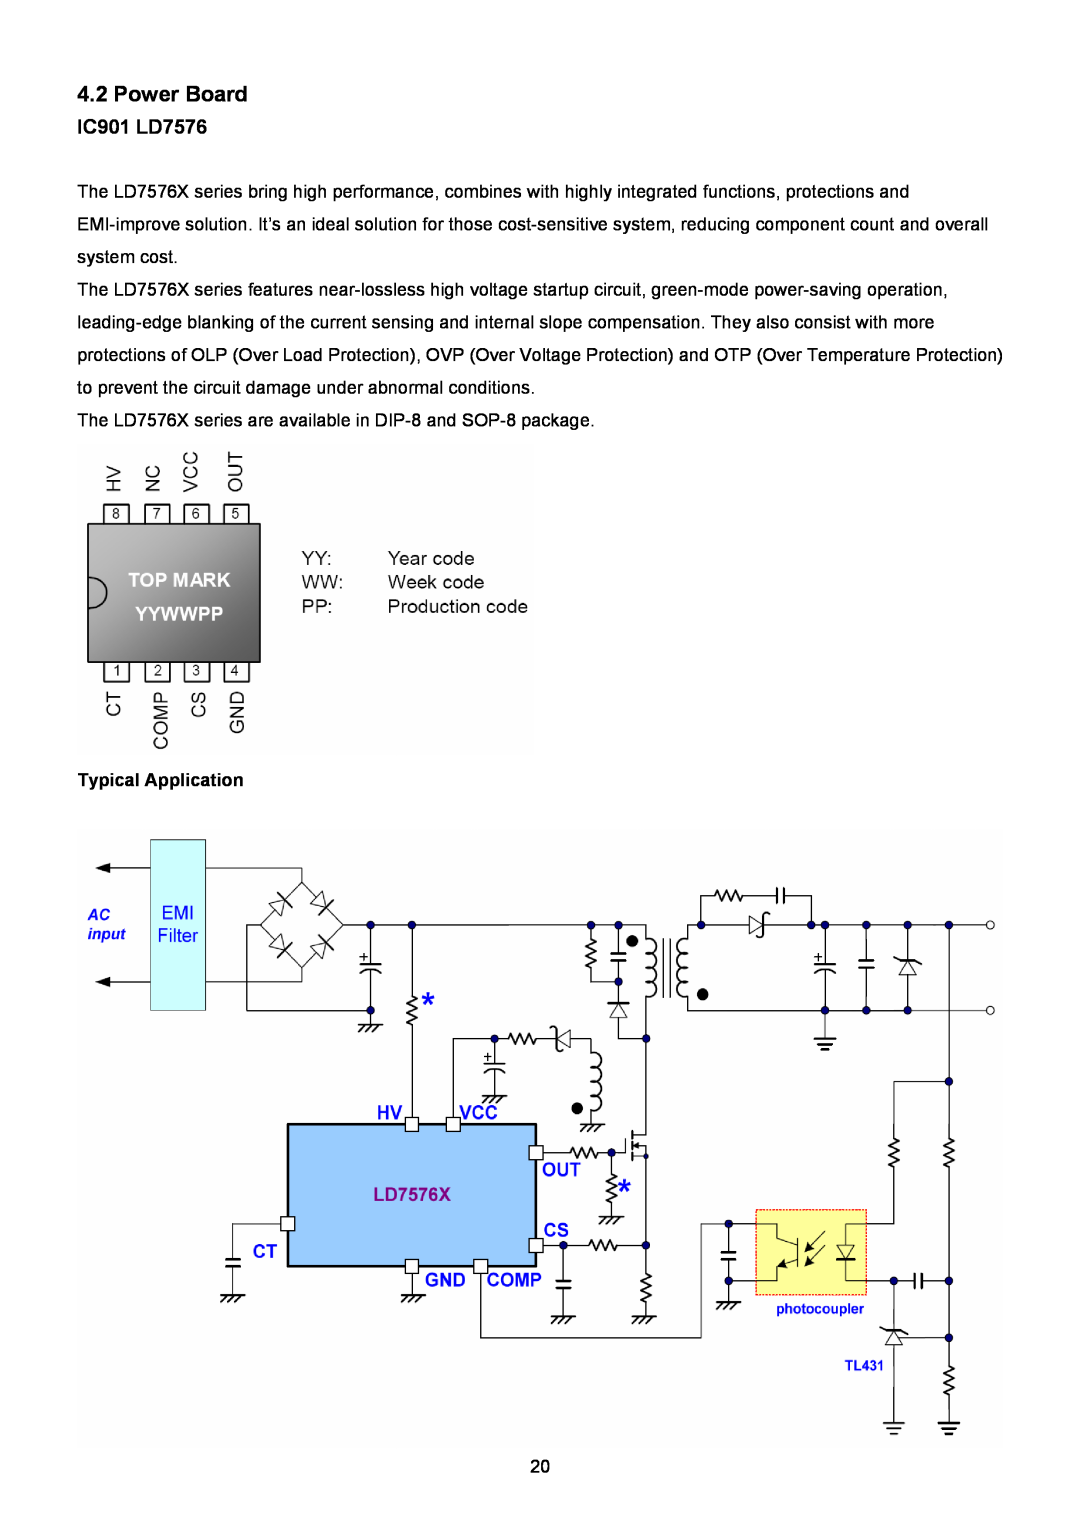 ViewSonic VSXXXXX service manual Power Board, IC901 LD7576, Typical Application 